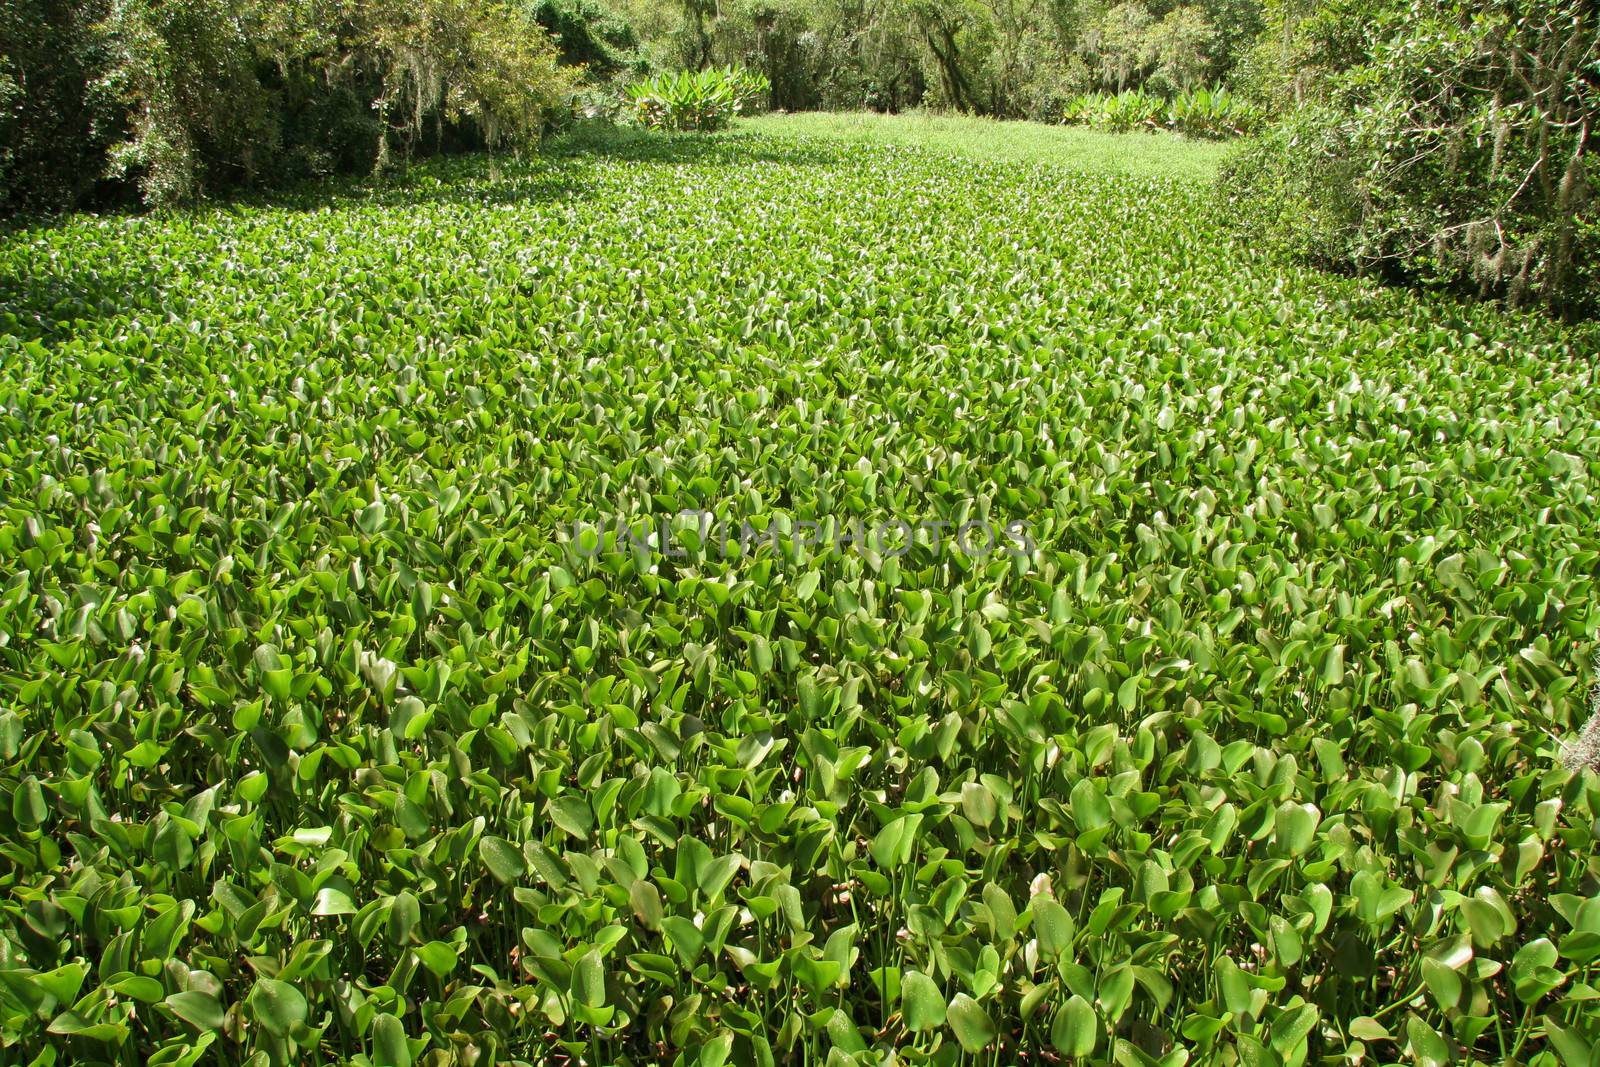 Water hyacinth in a swamp, Everglades National Park, Florida, USA